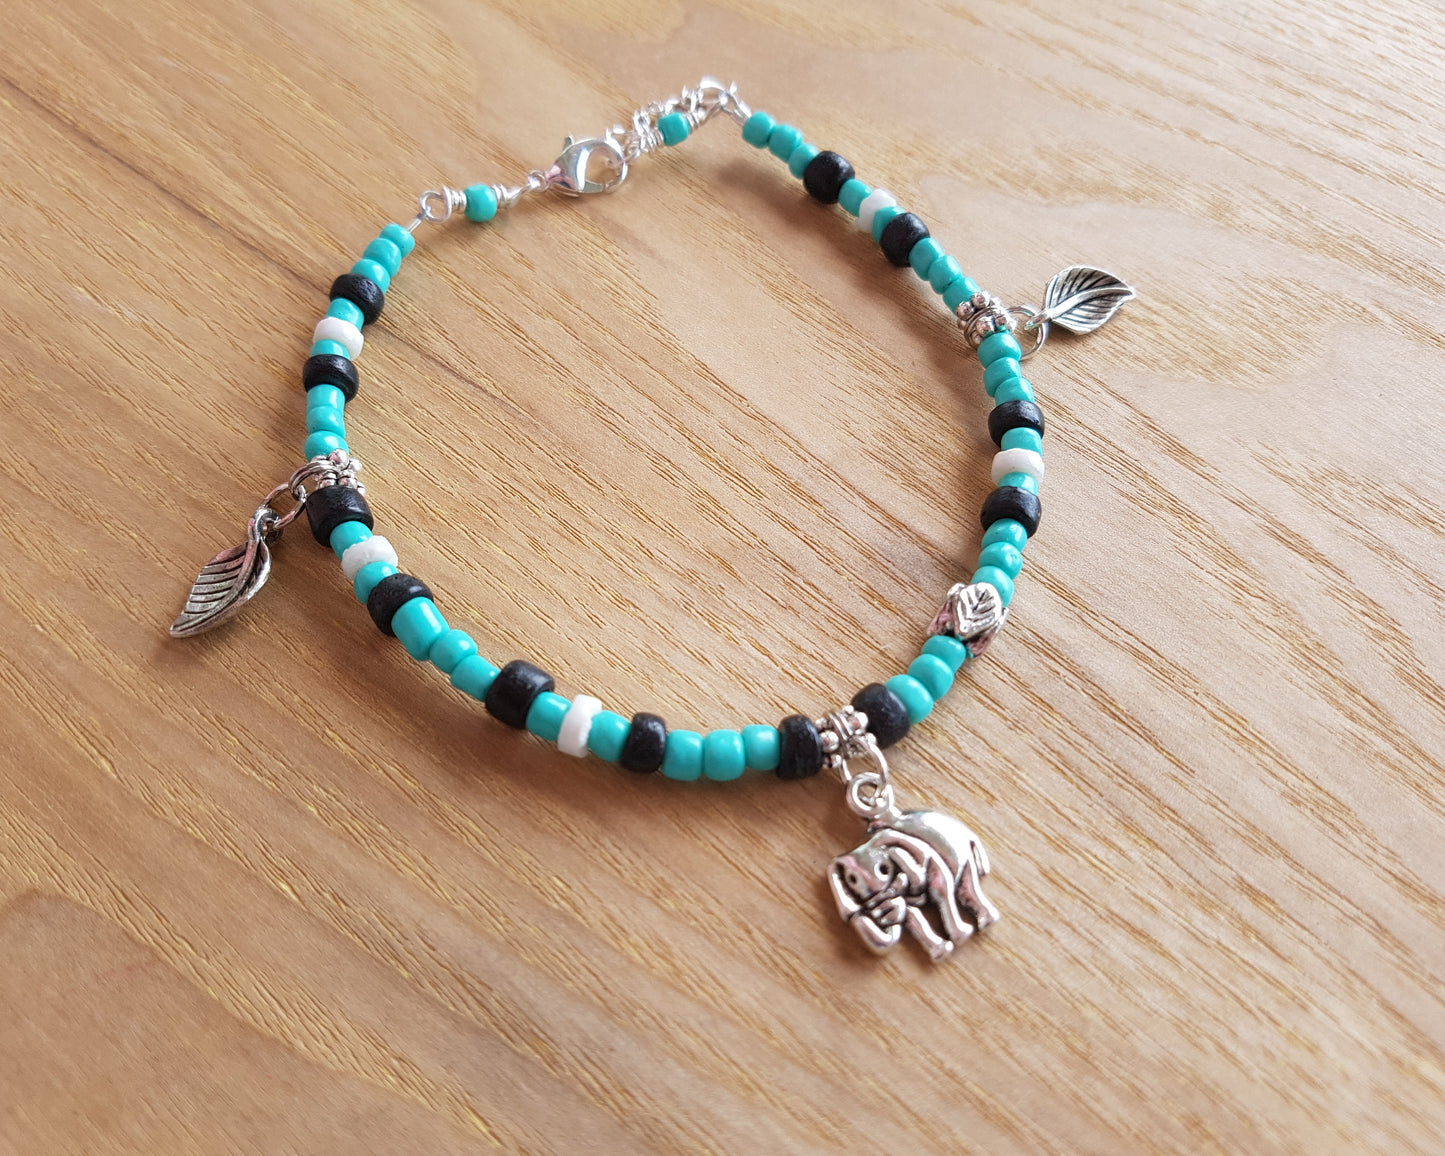 Elephant Turquoise Forest Anklet, Elephant Anklet, Beaded Anklet with Turquoise, Vintage white shell, Vintage Coconut beads with dangling Elephant pendants